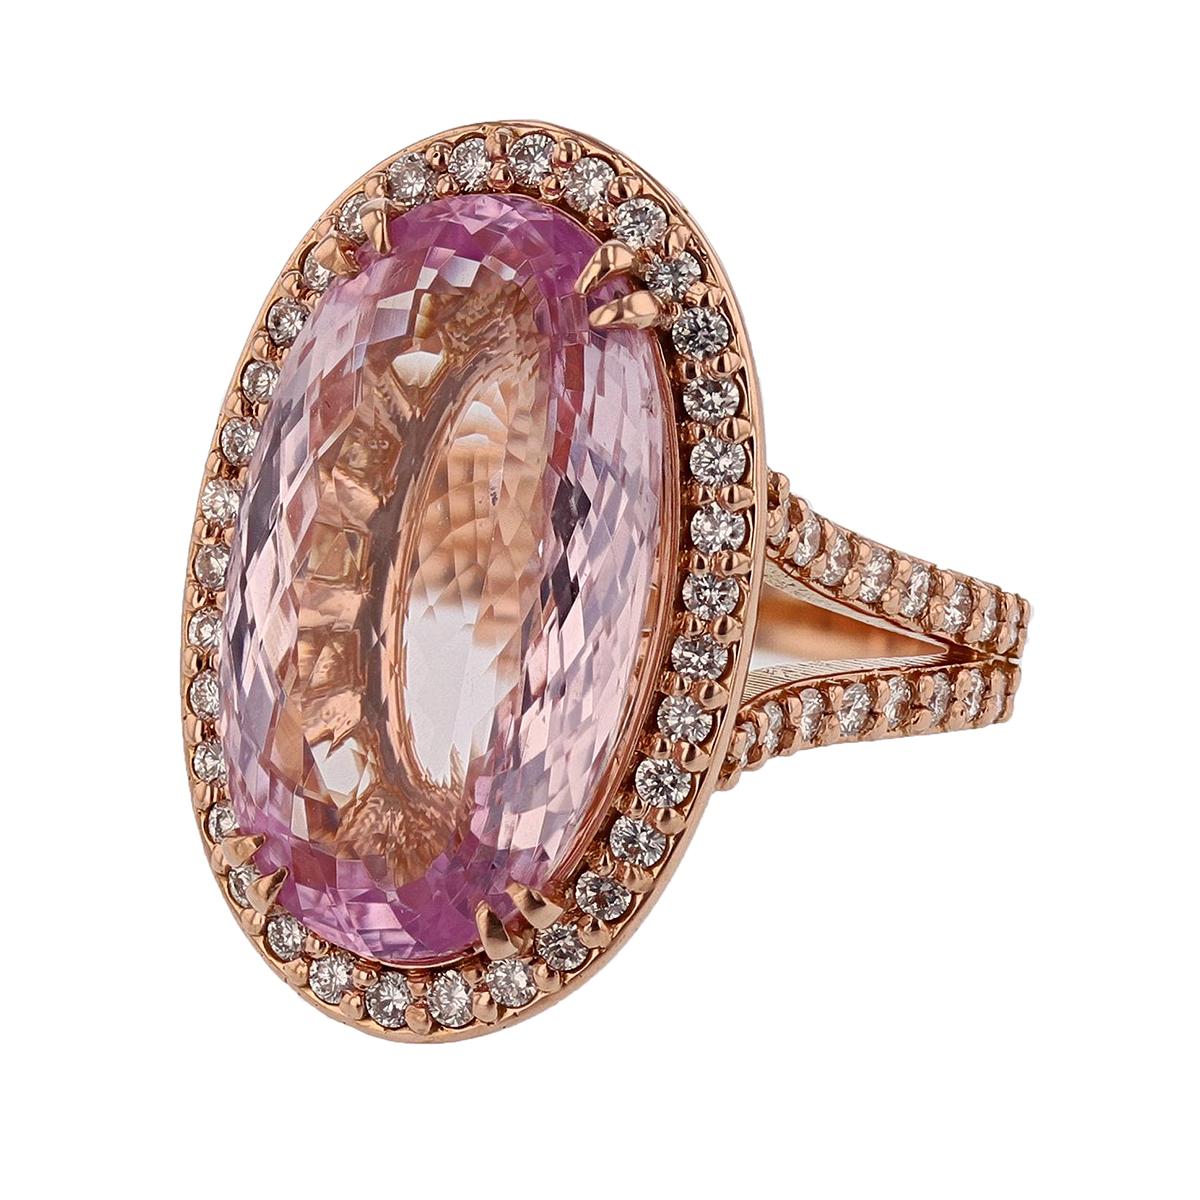 This one-of-a-kind ring is made in 14K Rose gold. The center stone is a stunning, oval cut Kunzite weighing 11.94ct, prong set. The mounting also features 66 prong set, round diamonds weighing 0.80cts with a color grade (H) and clarity grade (SI2).